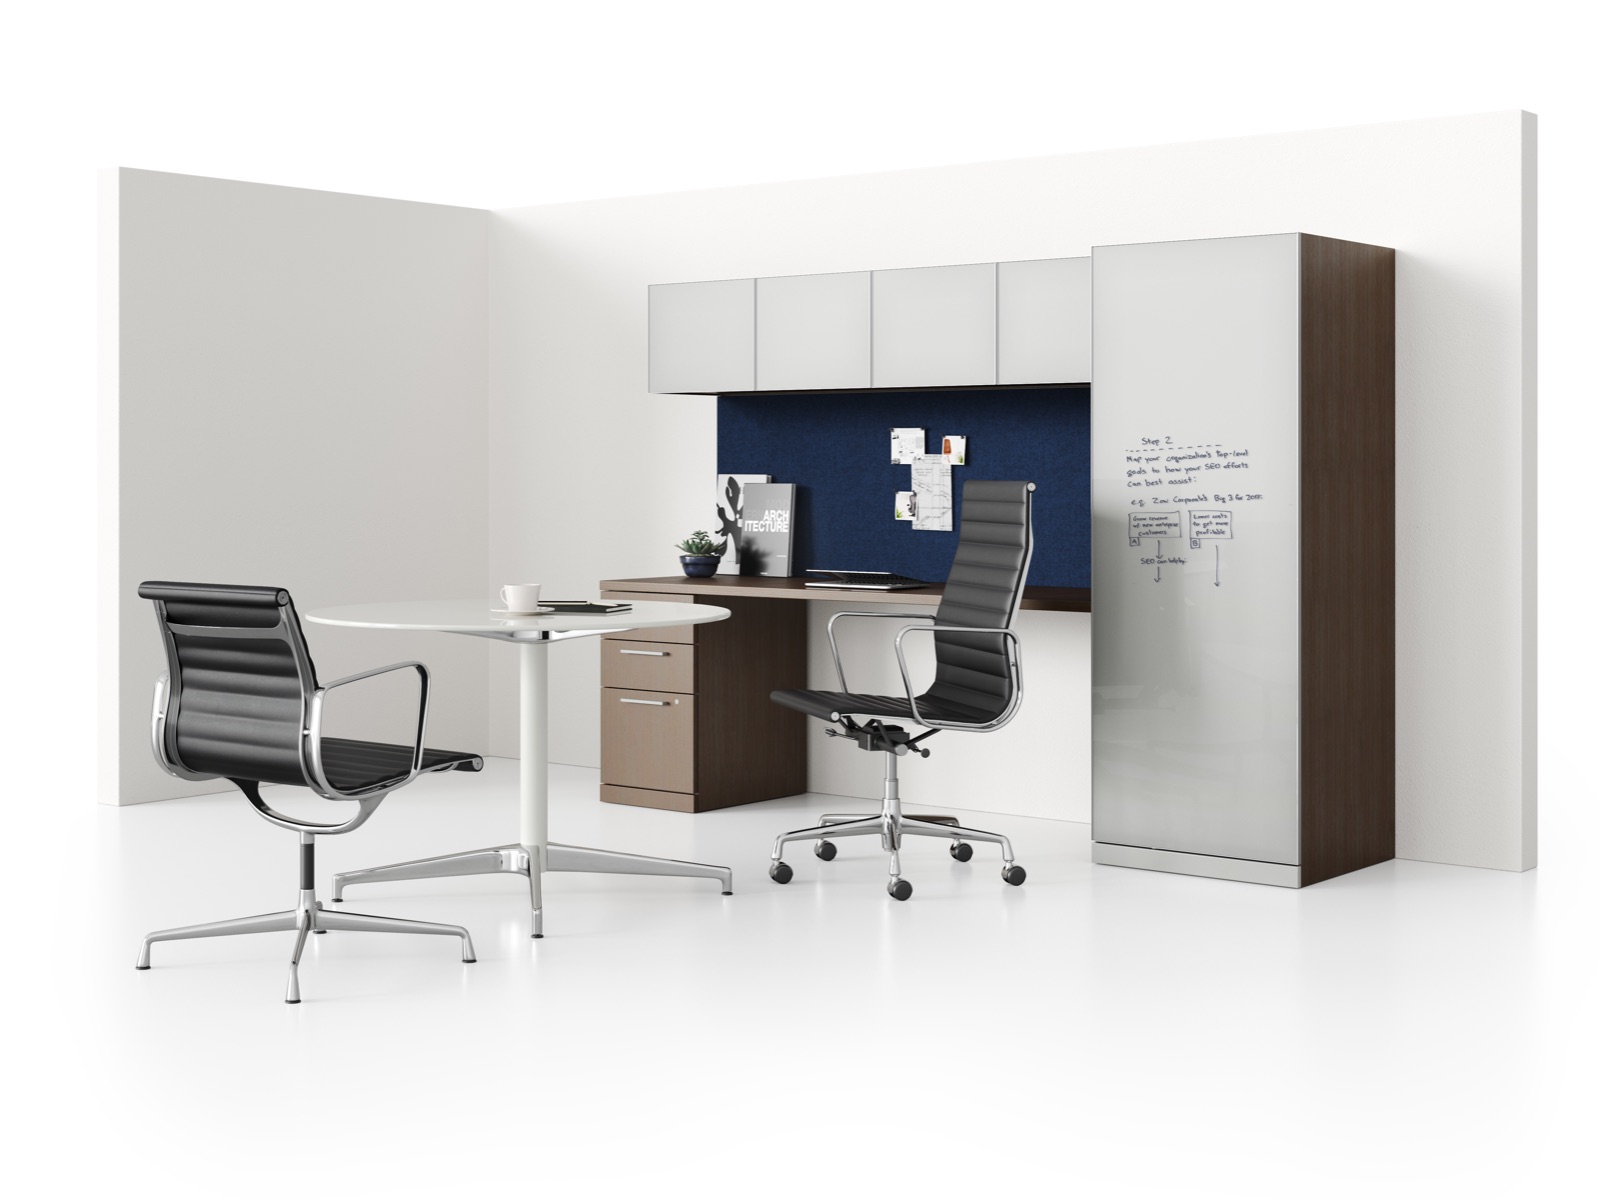 Sketches on a writable tower door in a Canvas Private Office that also includes overhead and pedestal storage.